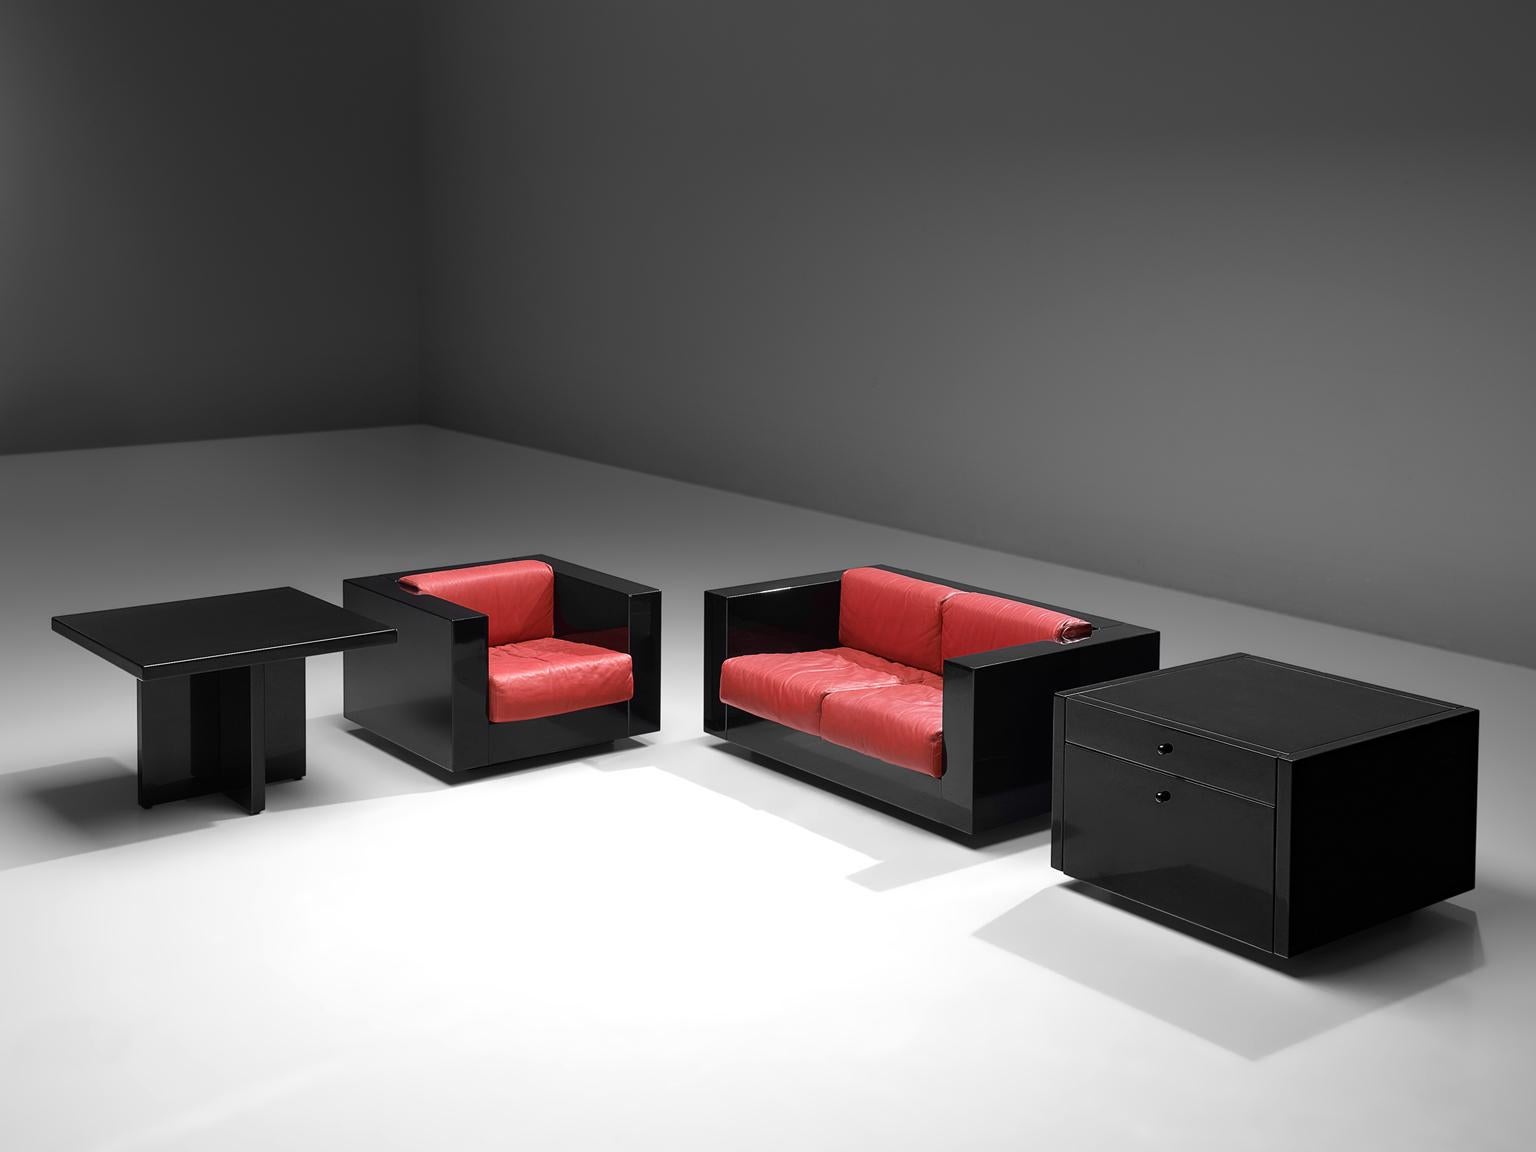 Massimo and Lella Vignelli for Poltronova, Saratoga living room set, black lacquered wood and red leather, Italy, 1964. 

This living room set named 'Sartoga' is designed by Italian designer couple Lella & Massimo Vignelli. The Vignelli's were